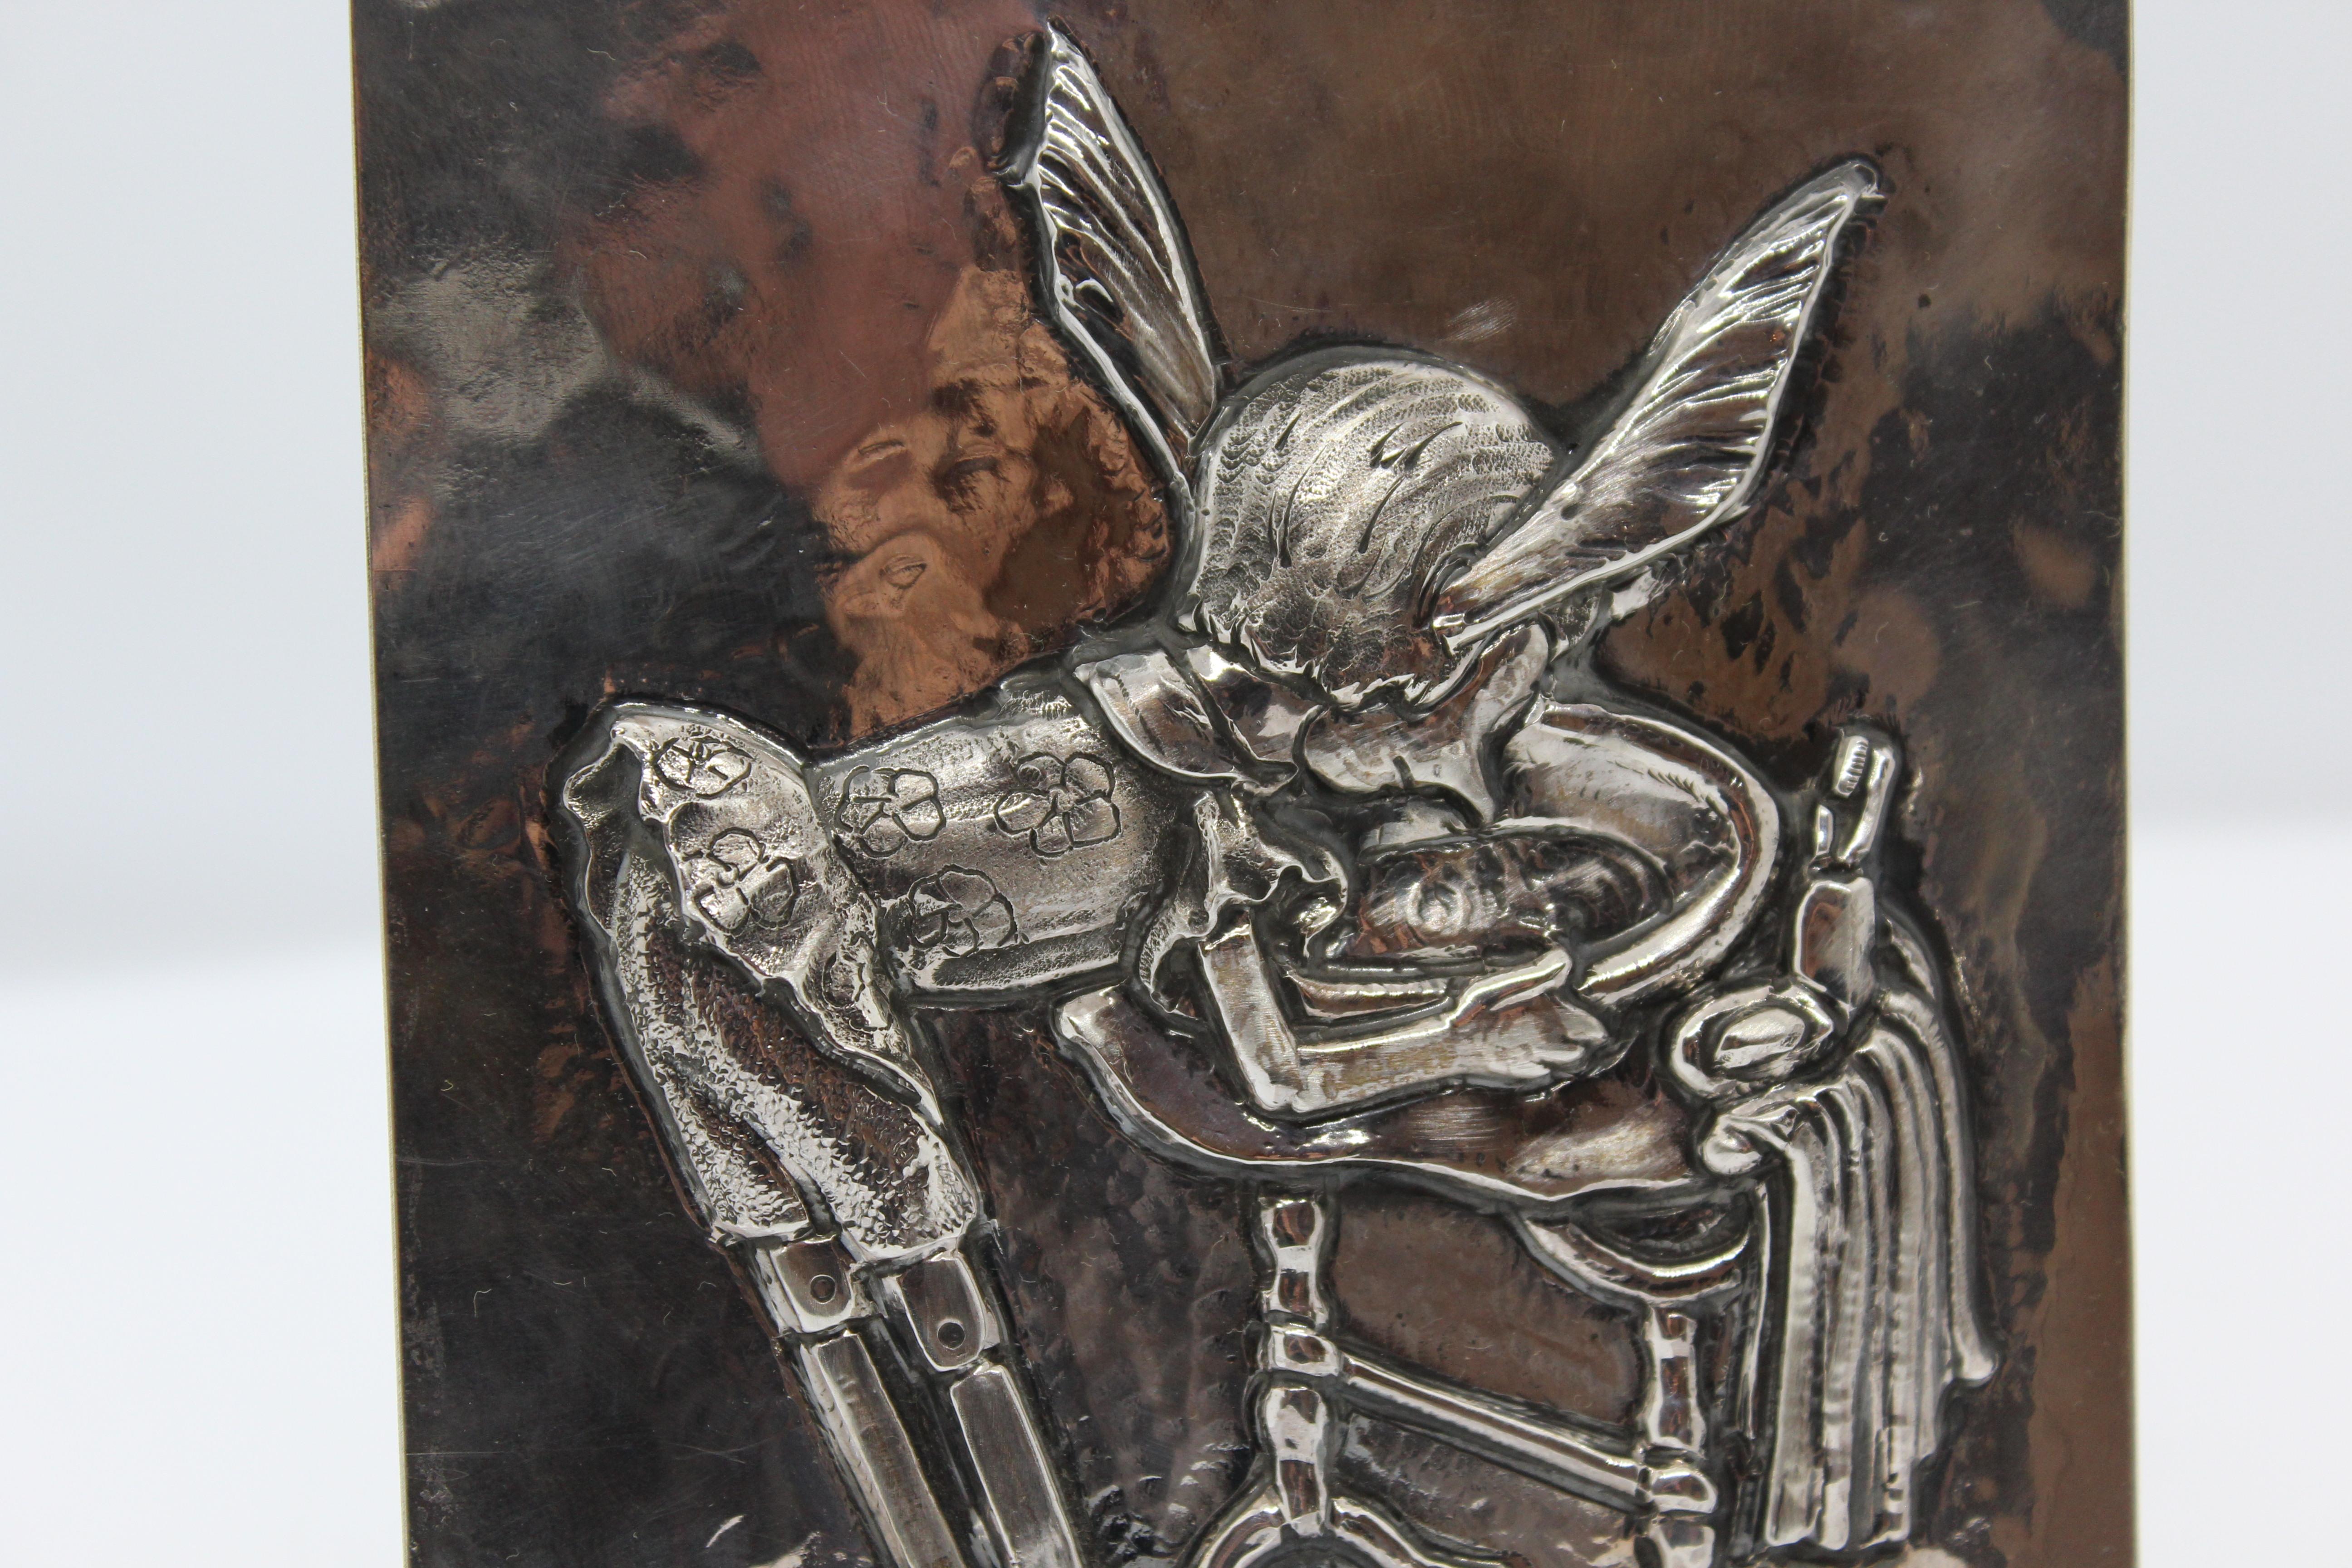 Pinocchio chiselled by a Florentine Artist on a Silver Panel, completely produced in Italy.
Giuliano Foglia chiselled the whole surface of the Panel.
